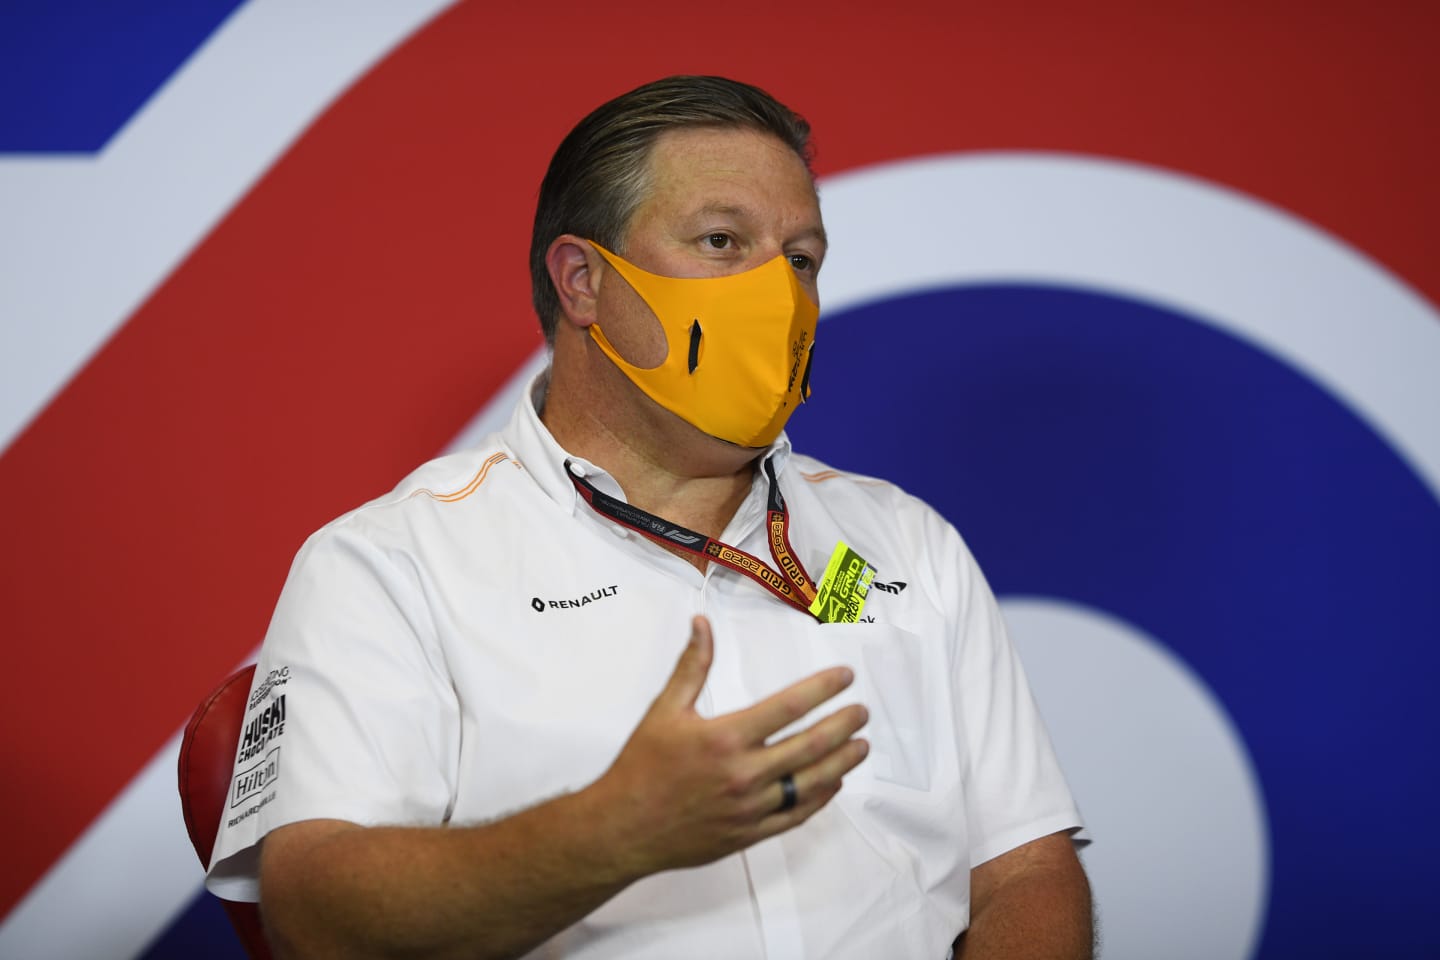 NORTHAMPTON, ENGLAND - AUGUST 07: McLaren Chief Executive Officer Zak Brown talks in the Team Principals Press Conference during practice for the F1 70th Anniversary Grand Prix at Silverstone on August 07, 2020 in Northampton, England. (Photo by Rudy Carezzevoli/Getty Images)